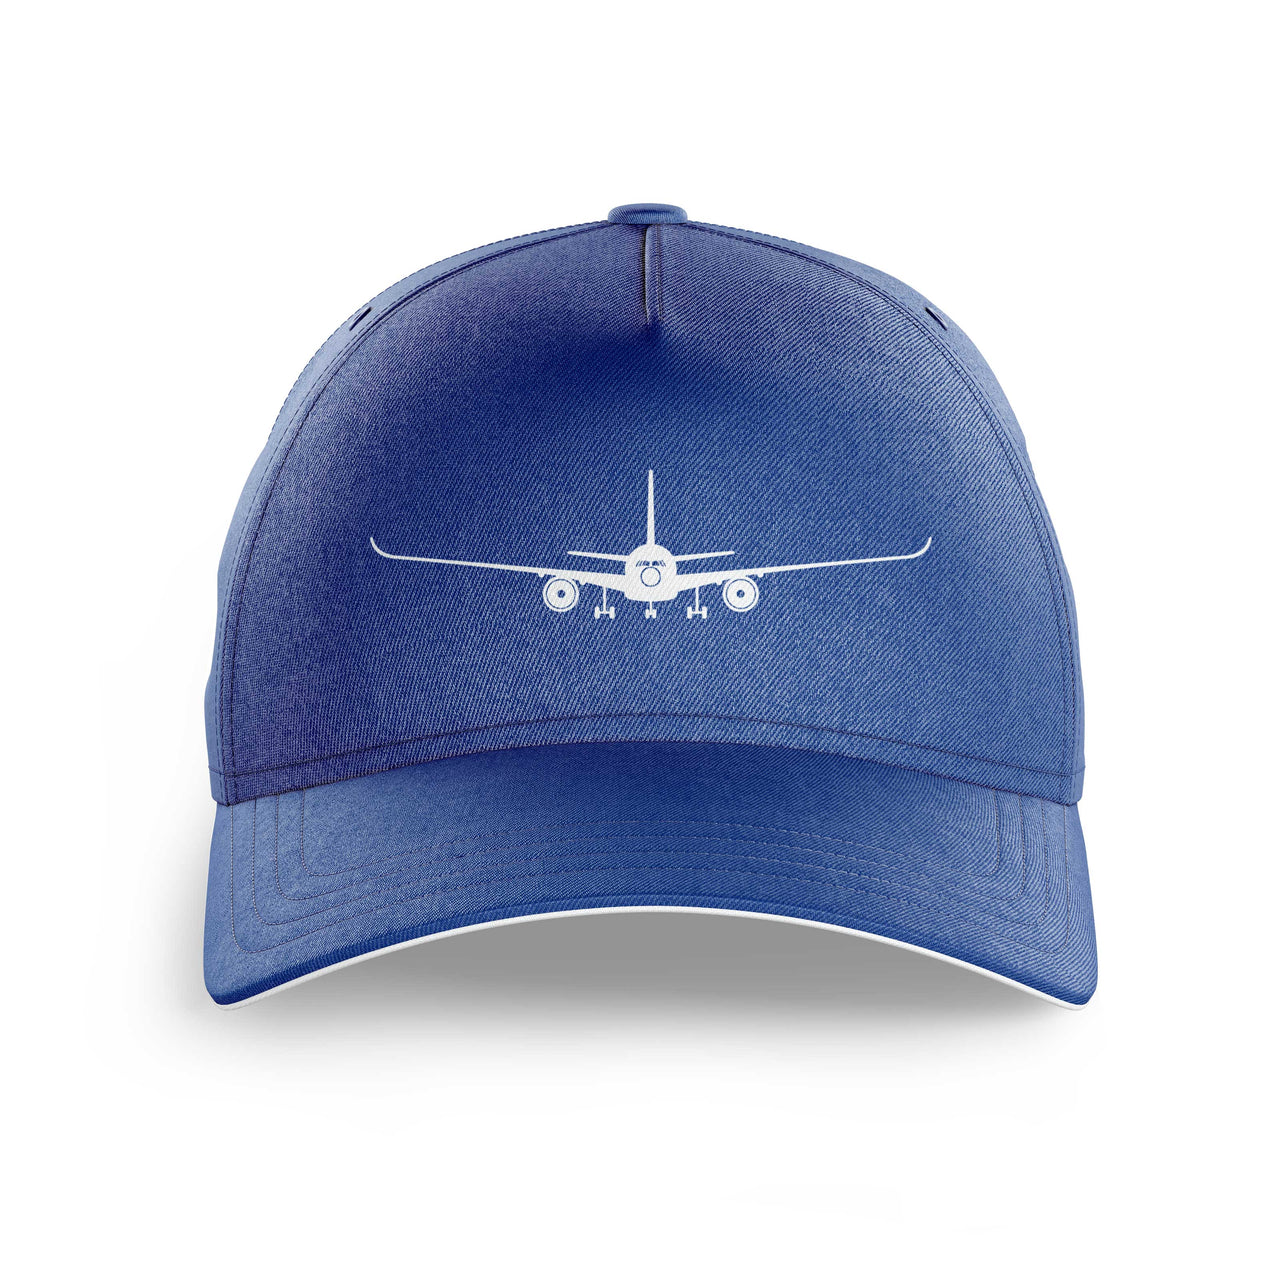 Airbus A350 Silhouette Printed Hats